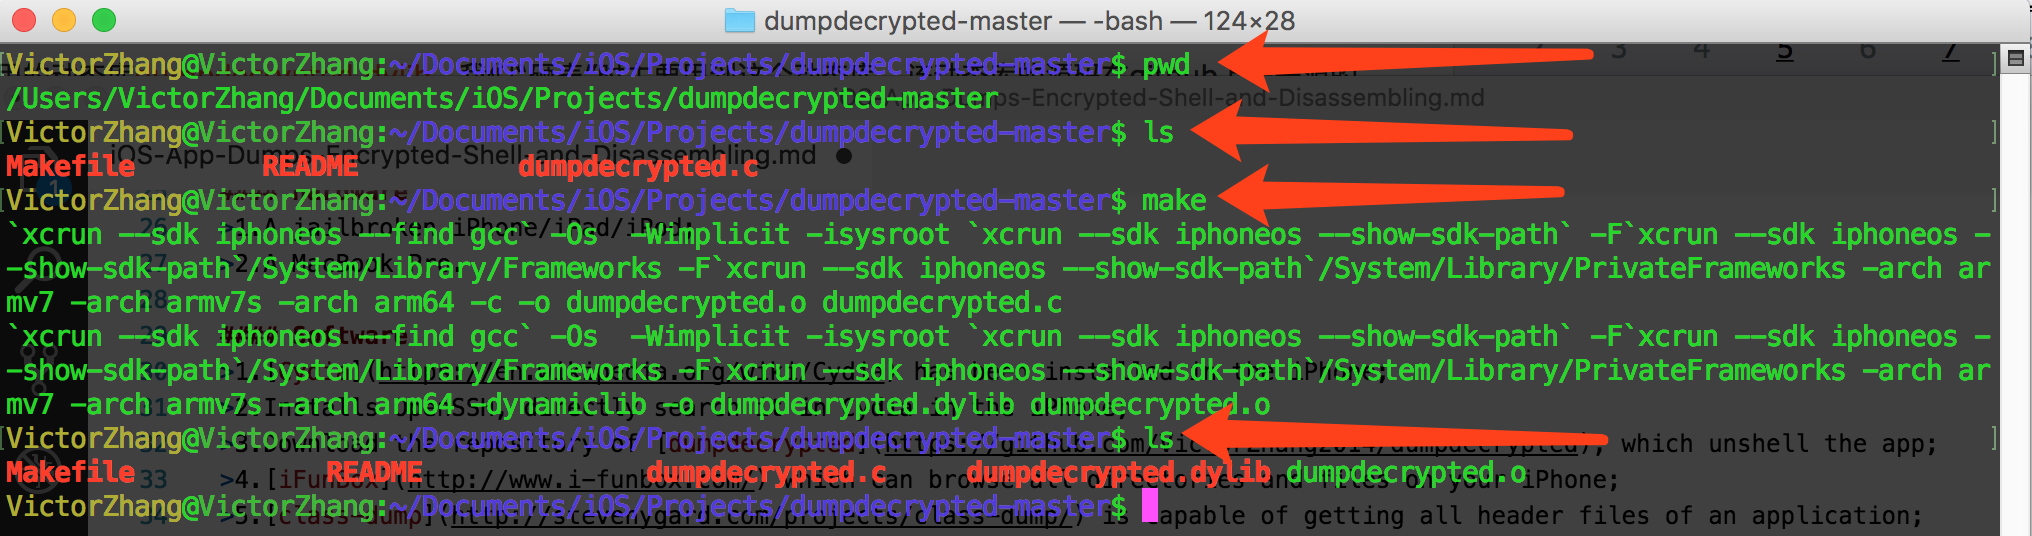 dumpdecrypted command